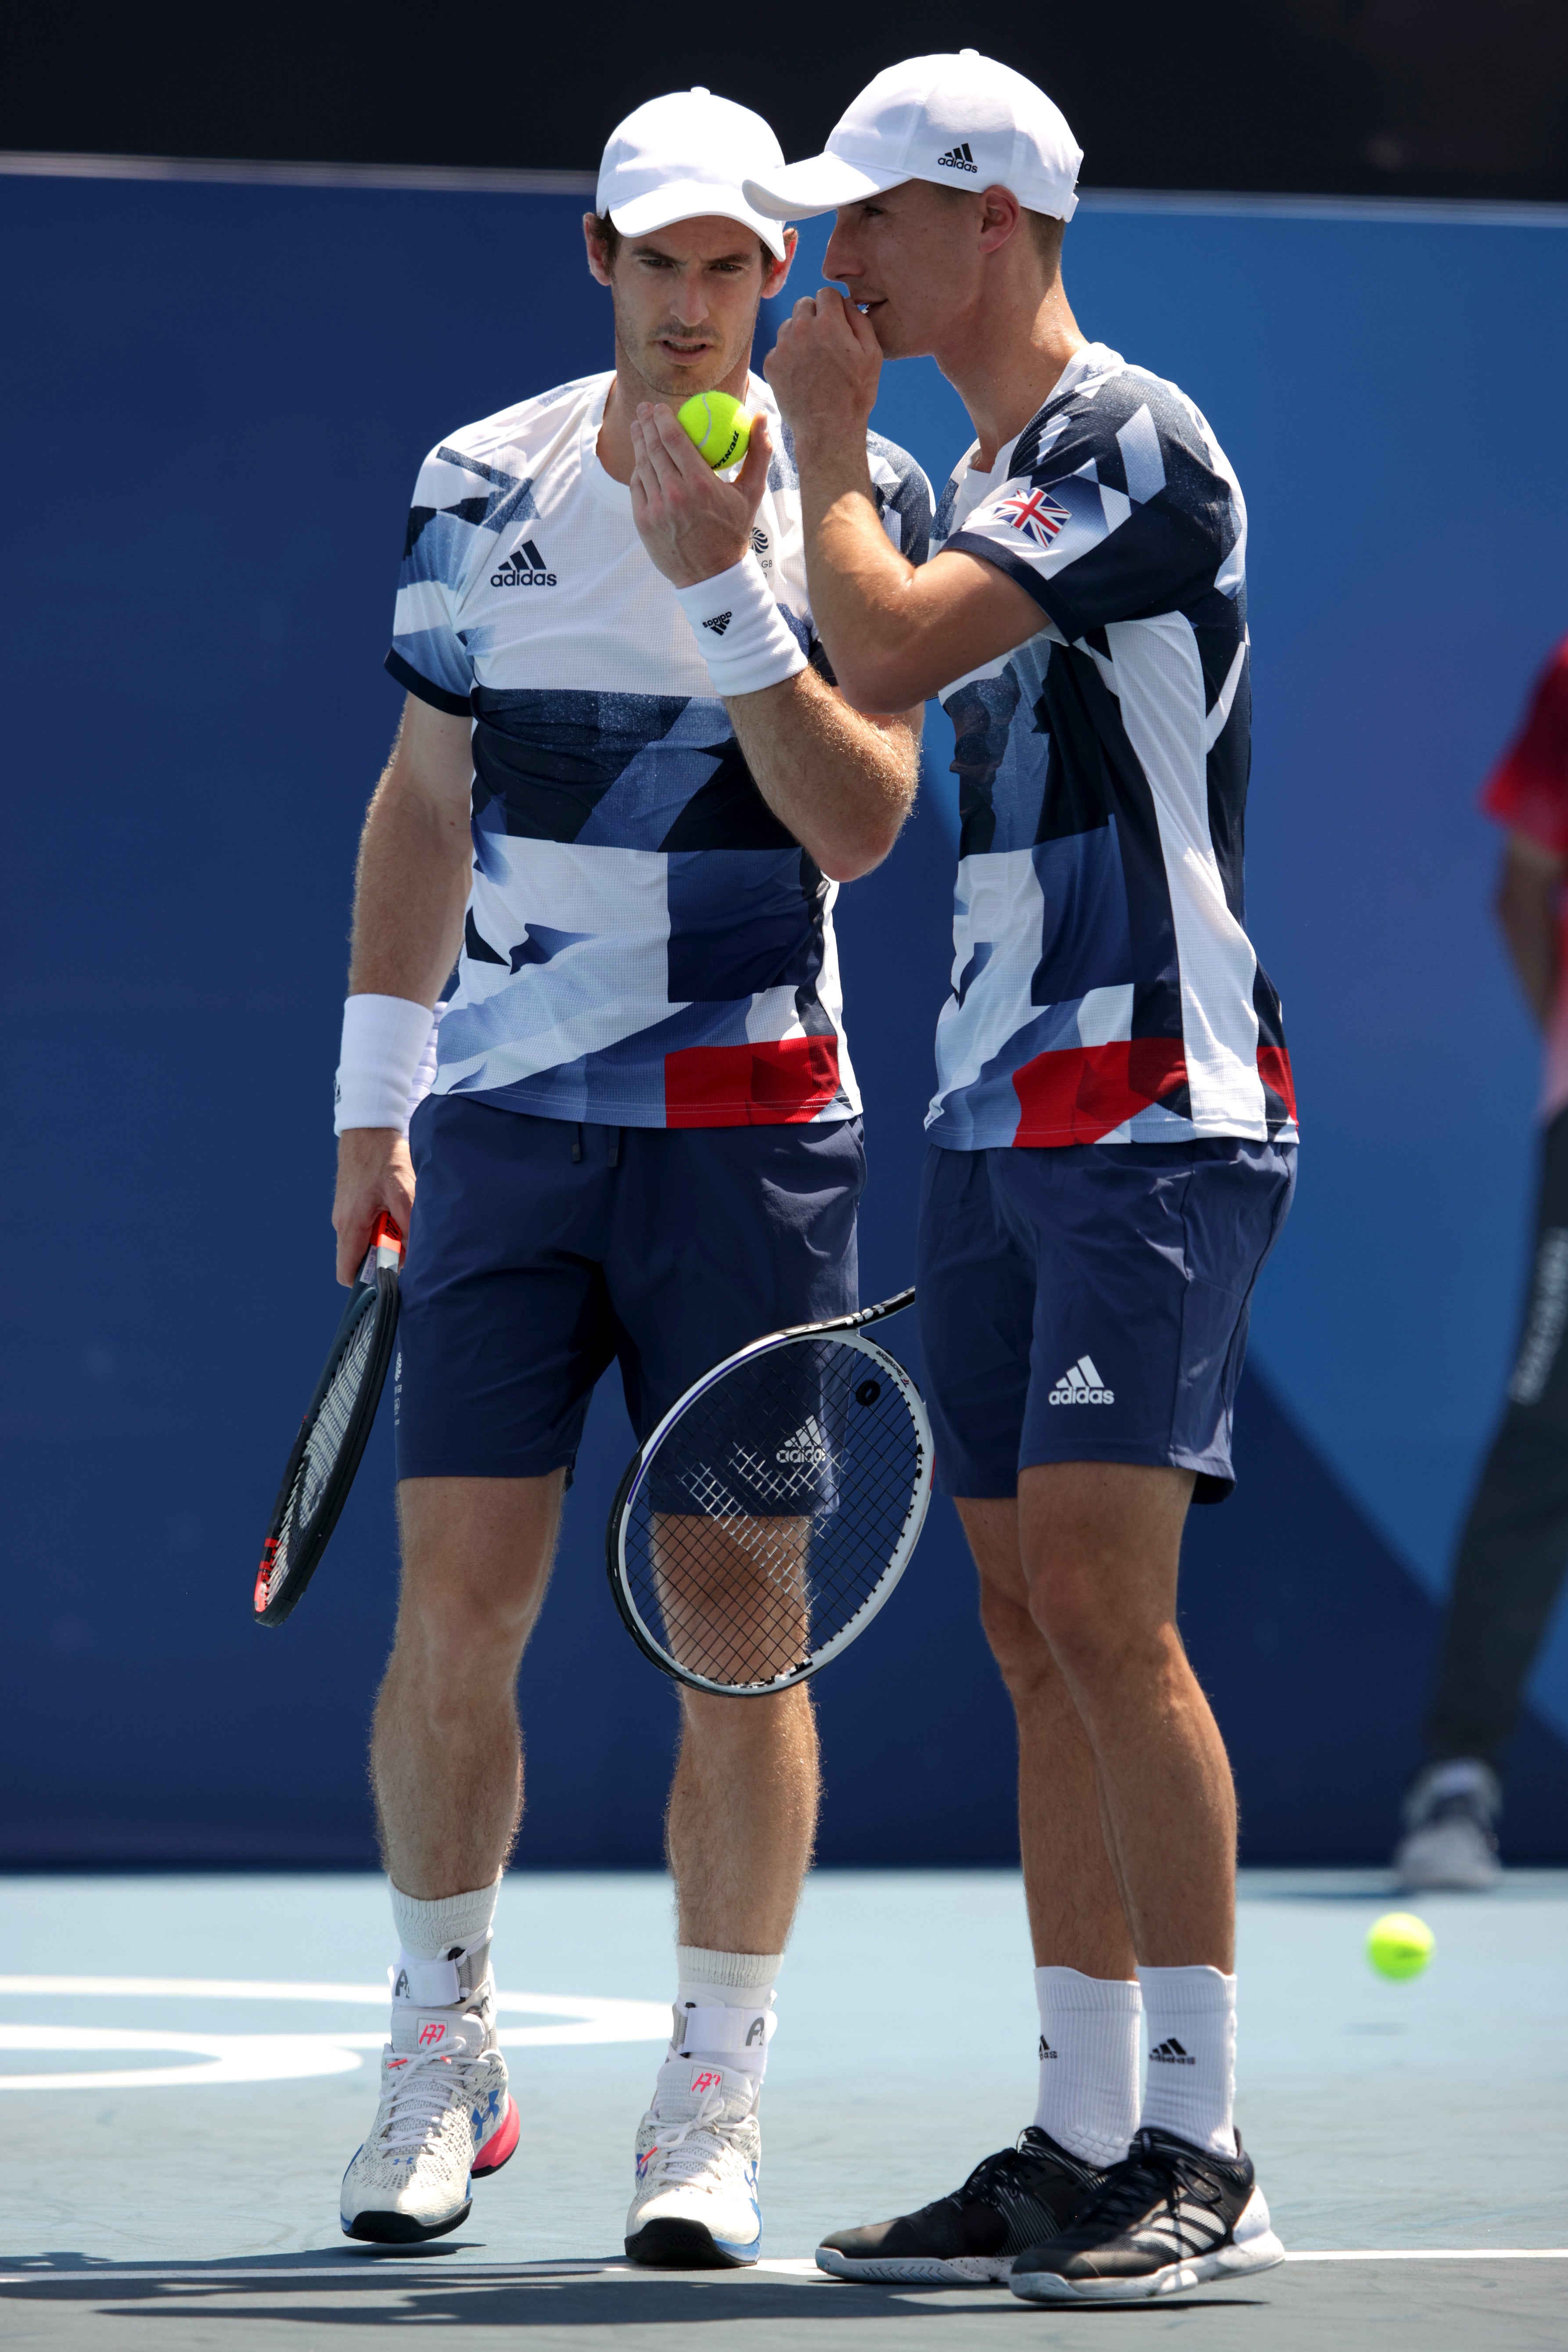 Andy Murray of Team Great Britain talks with his partner Joe Salisbury of Team Great Britain during their Men's Doubles First Round match against Nicolas Mahut of Team France and Pierre-Hugues Herbert of Team France on day one of the Tokyo 2020 Olympic Games at Ariake Tennis Park on 24 July 2021 in Tokyo, Japan